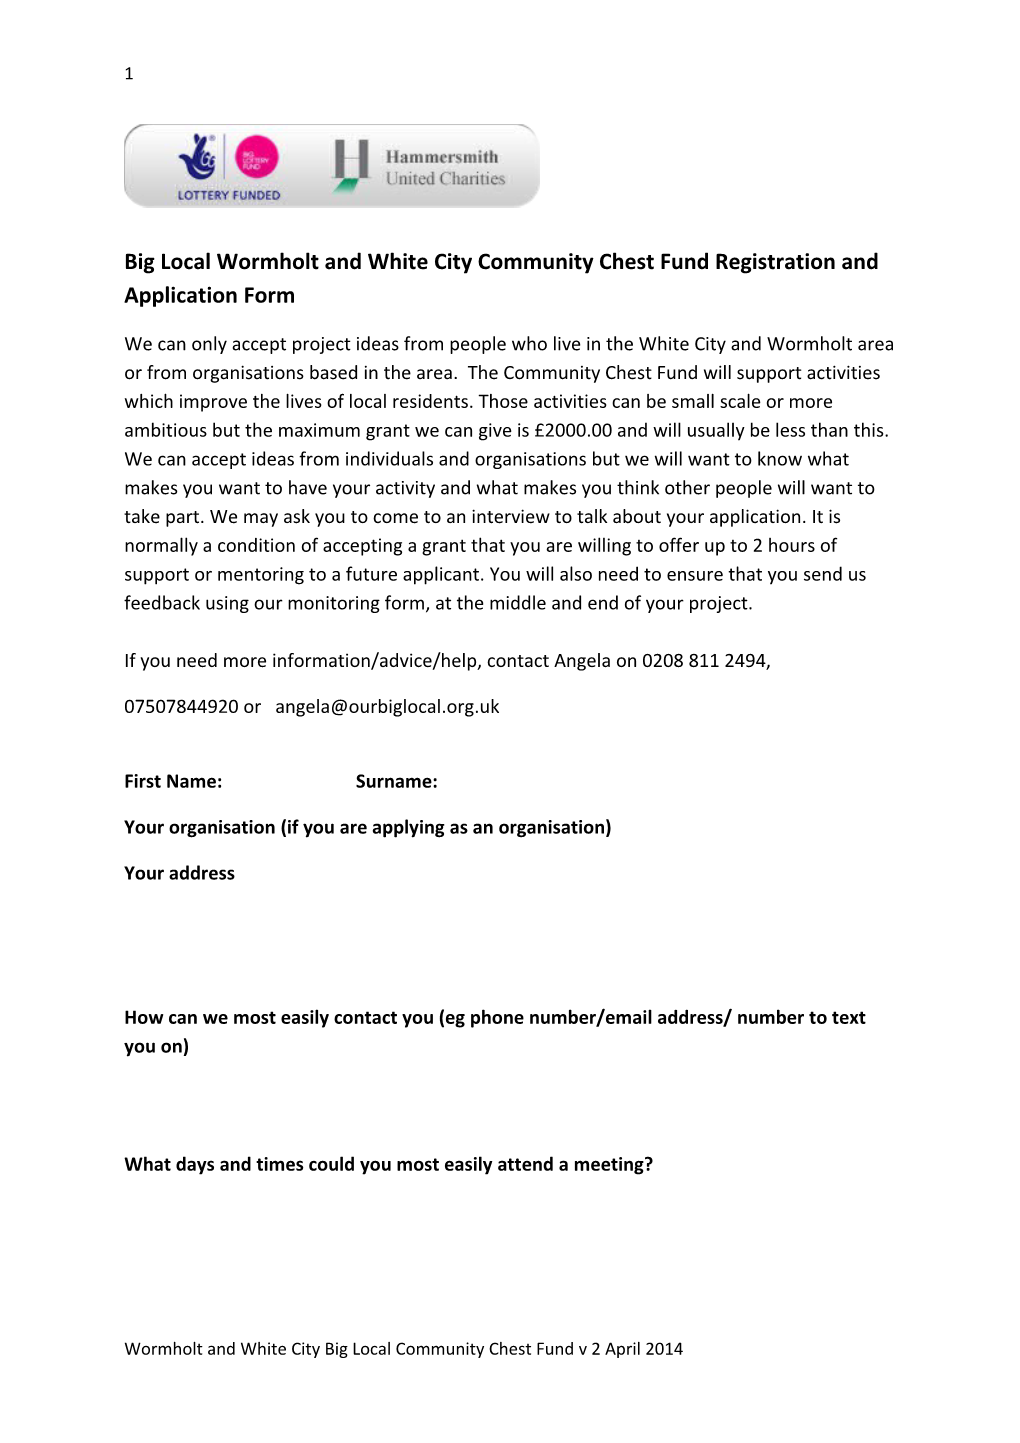 Big Local Wormholt and White City Community Chest Fund Registration and Application Form